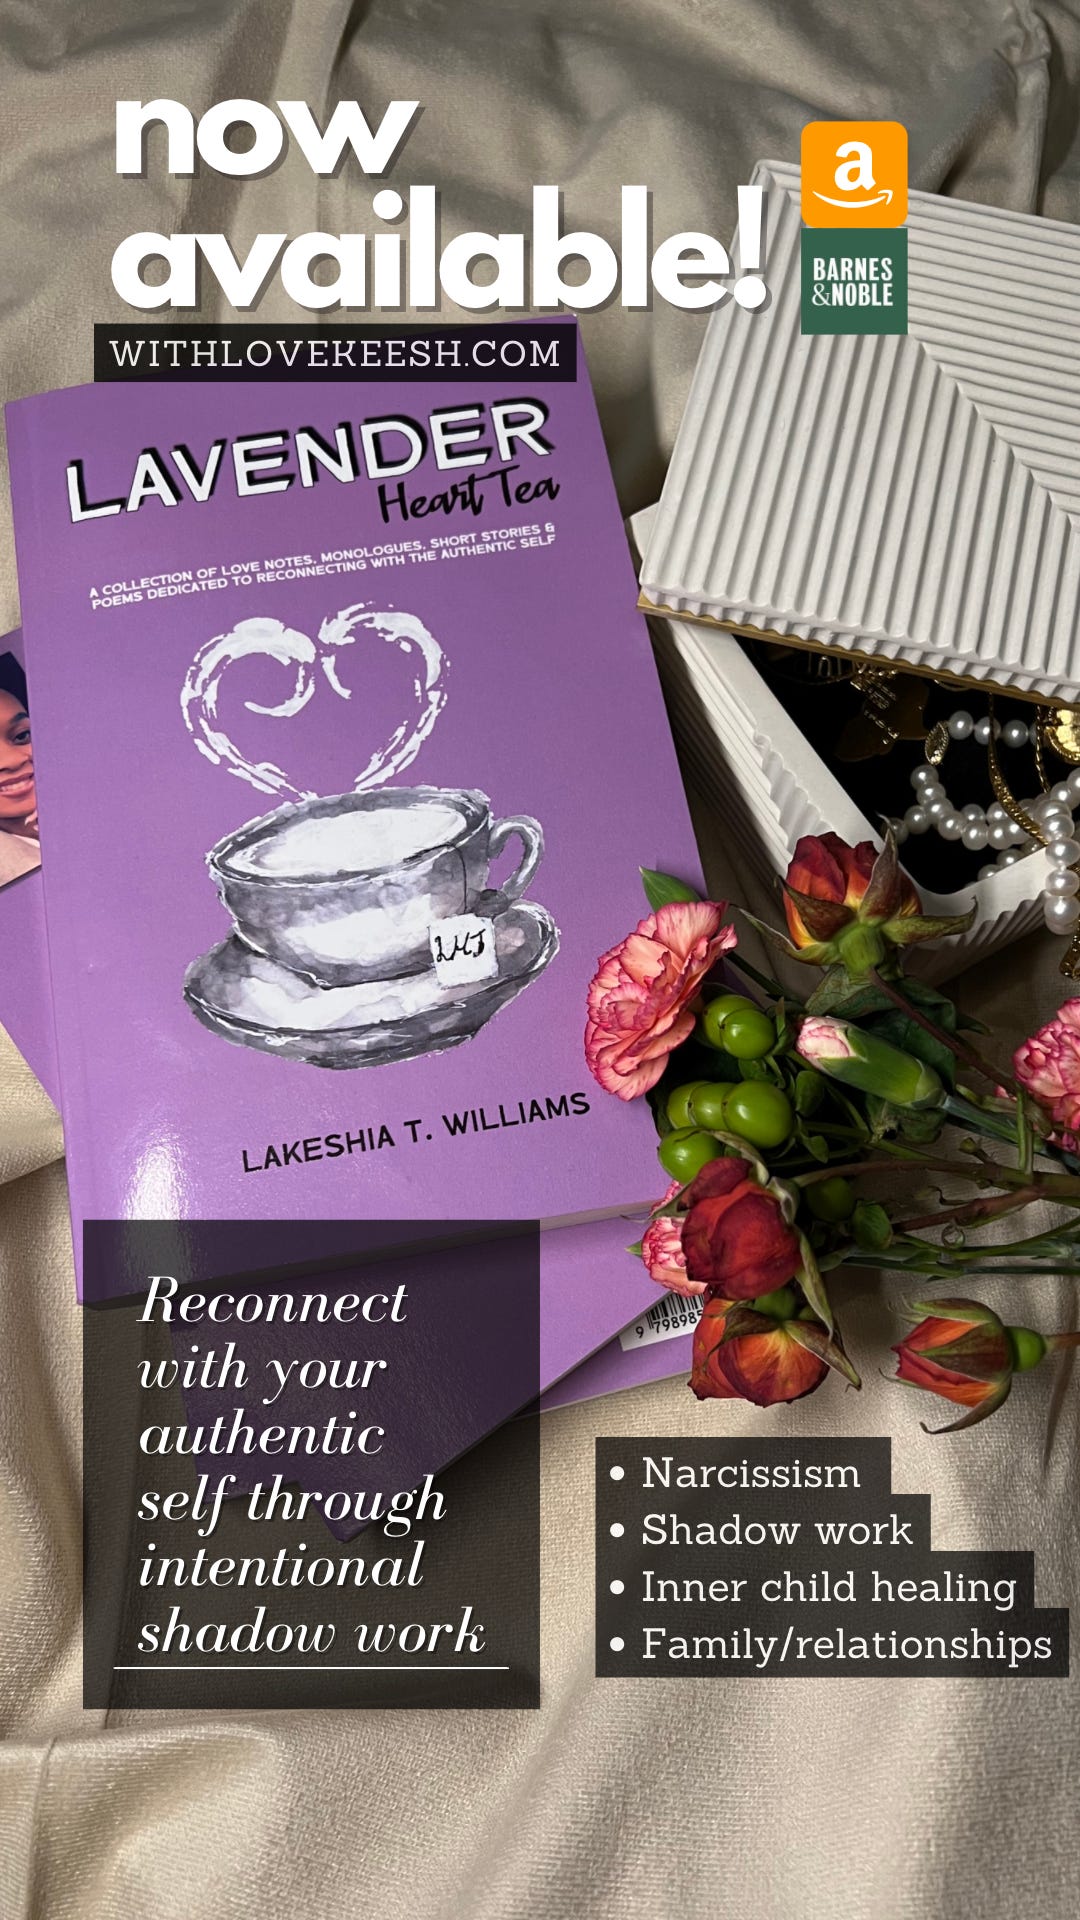 An Invitation to Tea: Lavender Heart Tea Lavender Heart Tea: A Collection of Love Notes, Monologues, Short Stories & Poems Dedicated to Reconnecting with the Authentic Self invitation to sip the tea of my life, truths, and healing journey 